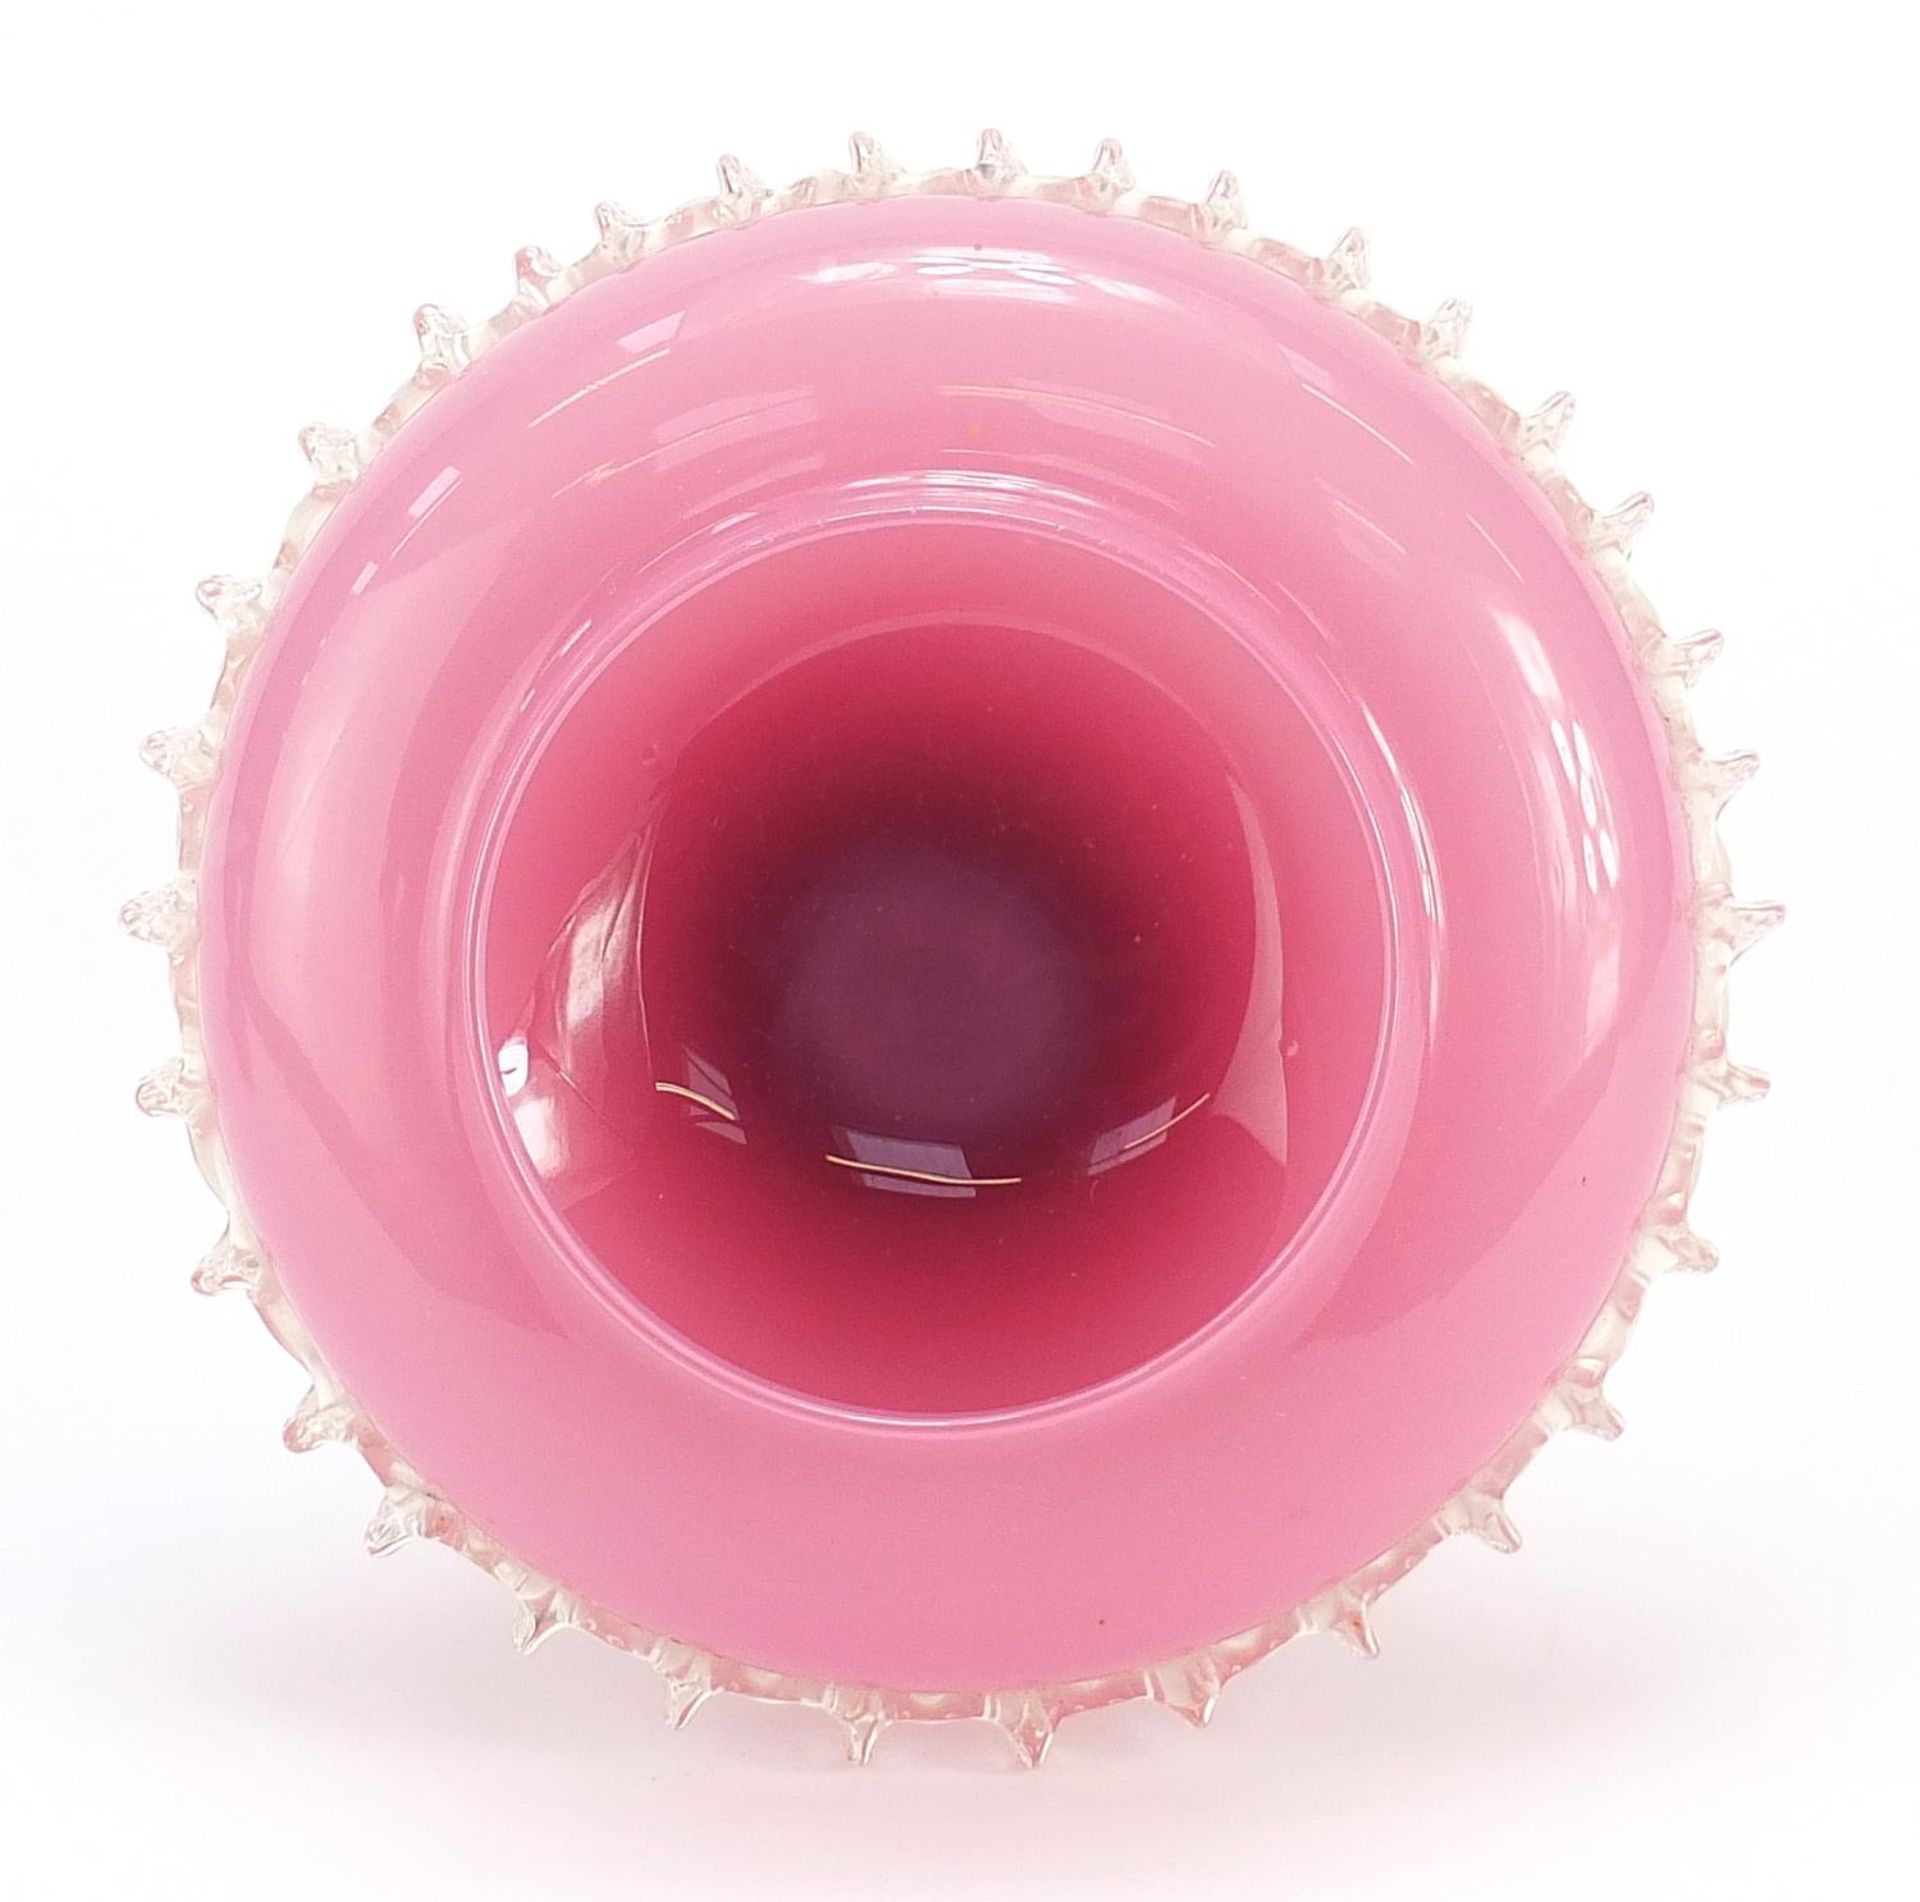 Vaseline and pink glass centerpiece and cover with frilled decoration, 30cm high - Image 3 of 4